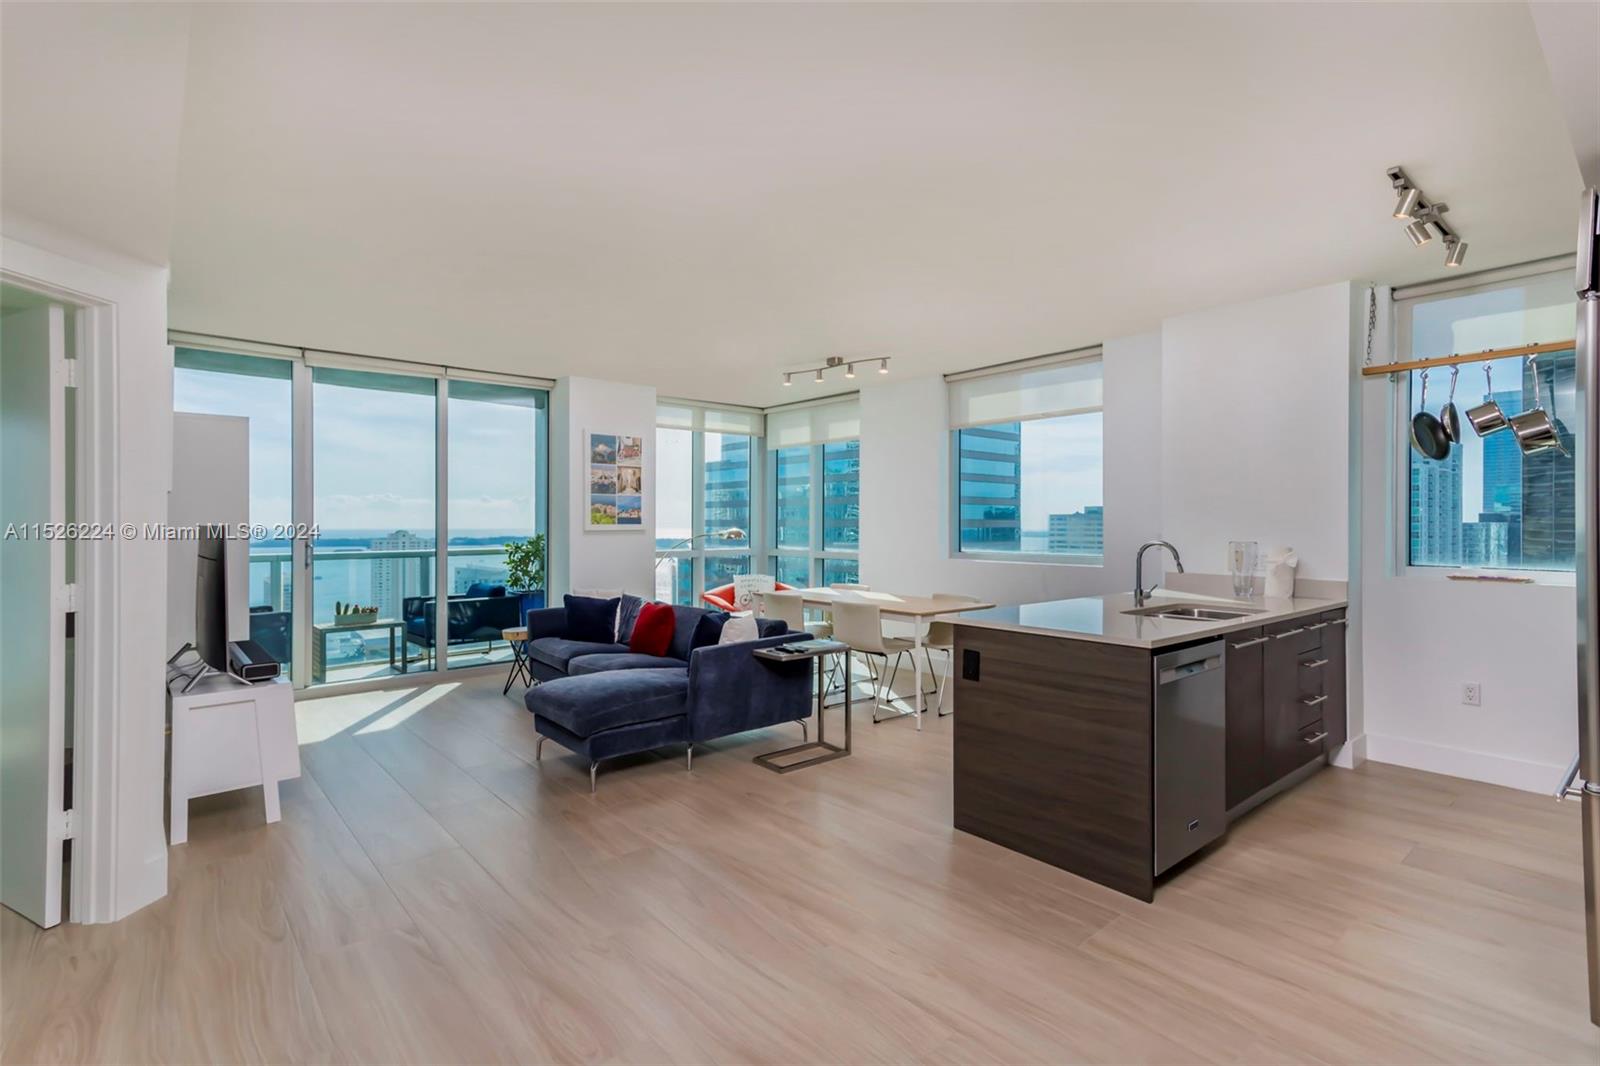 Rare, 2 Bedroom, 2 Bathroom, Southeast Corner Unit on Brickell Avenue overlooking Biscayne Bay and the Atlantic Ocean.  This spacious apartment features lots of windows and natural light, and a large, private terrace which stretches the full width of the apartment and offers stunning water views as far as the eye can see.  Enjoy new floors, new appliances.  Amenities include Two Rooftop Pools, including our 42nd rooftop pool which features panoramic views of the Bay & Ocean, His and Hers Spas, Fitness Center, Media Room, Community Room, Assigned Parking in the Gated Parking Garage + Valet, 24/7 Security and Front Desk.  Walk to Brickell's top Dining, Shopping and Nightlife, including the Brickell City Center, Sexy Fish, and Zuma.  15 minutes to the beach and airport.